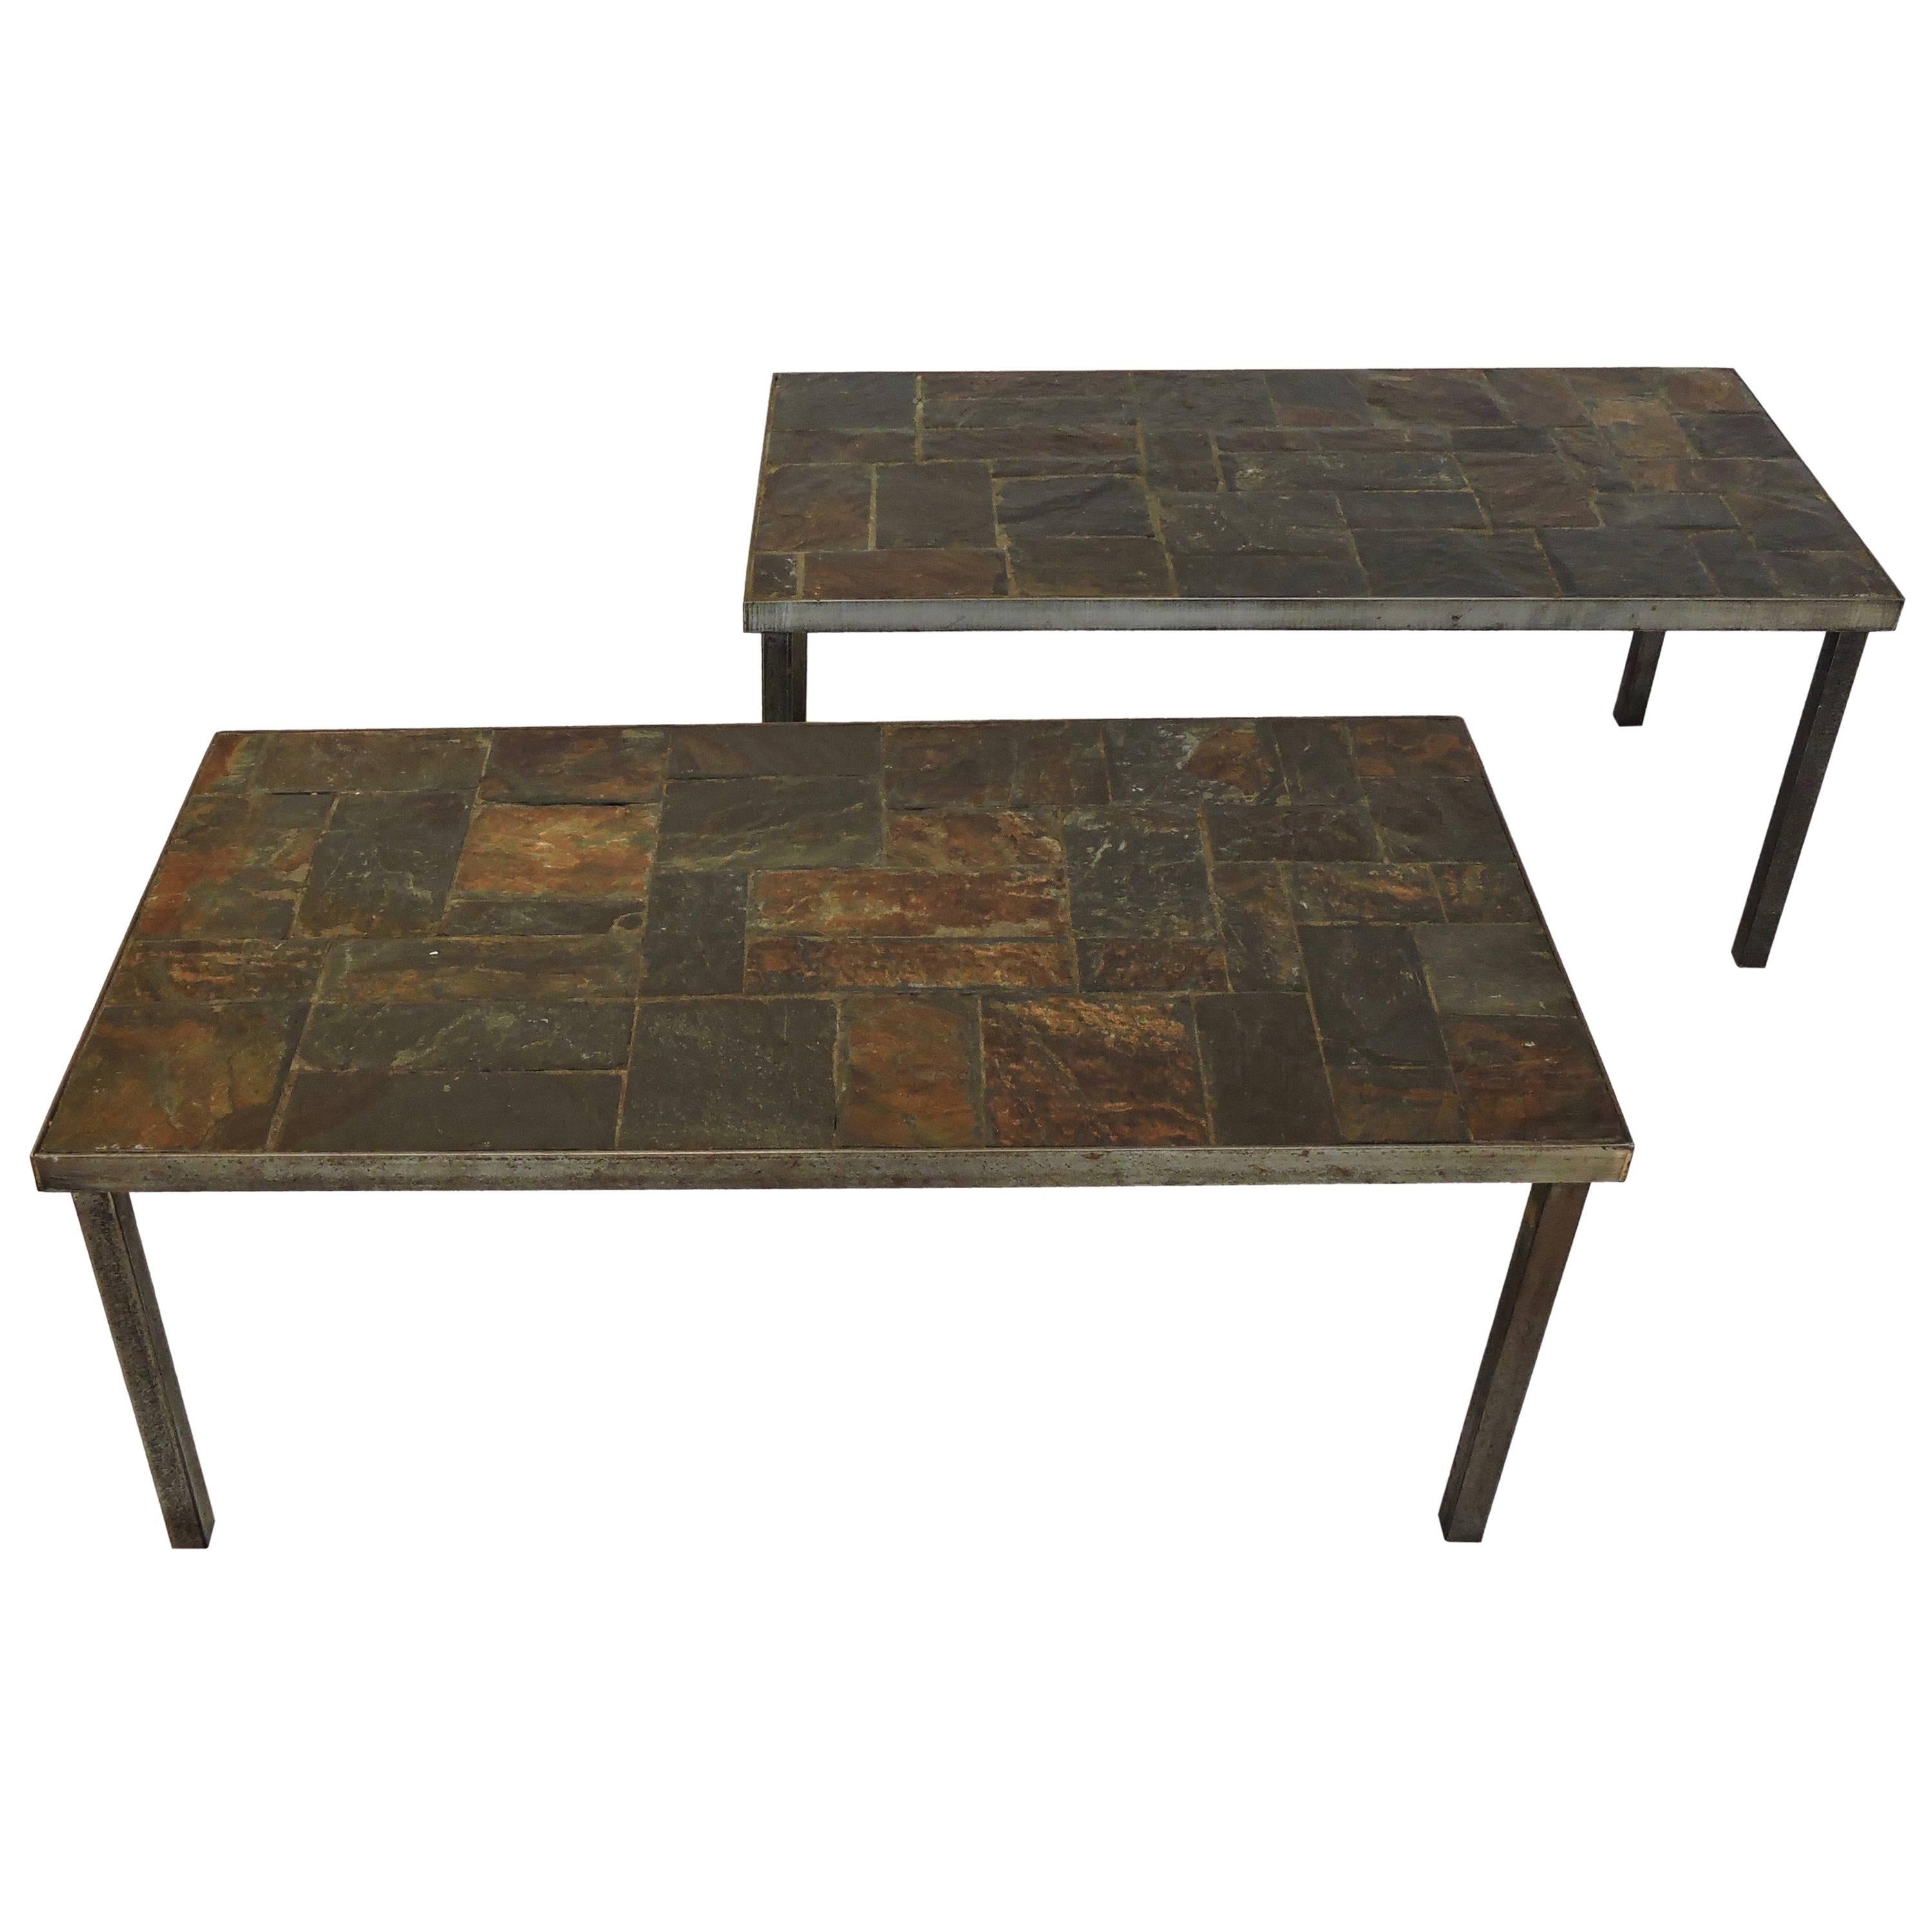 Pair of Lava Stone Coffee Tables